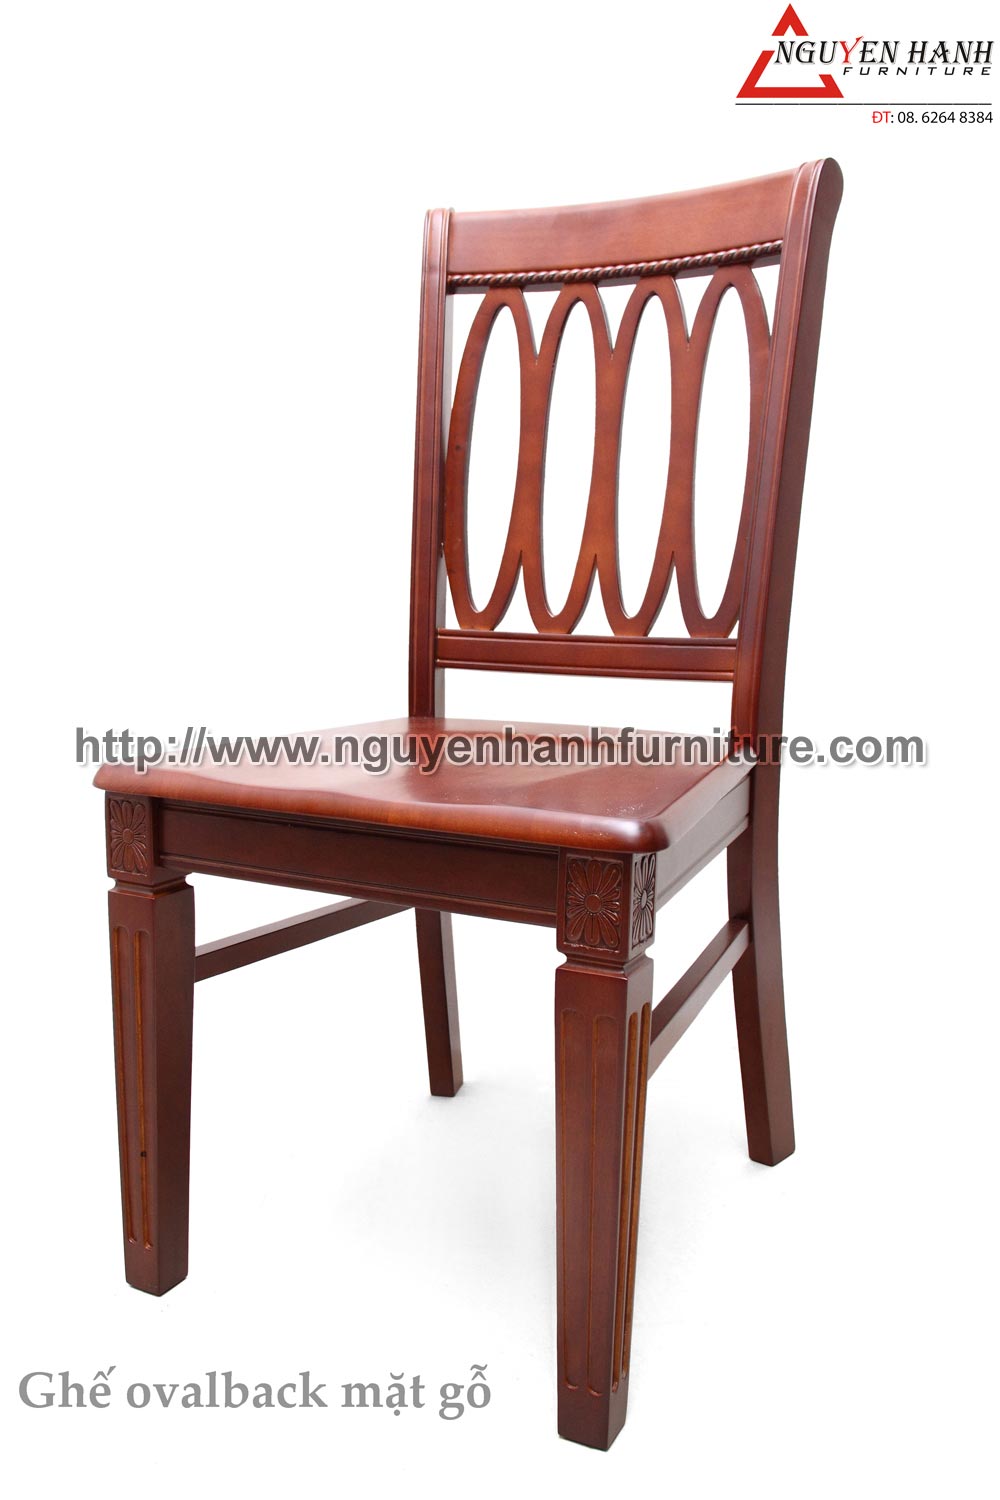 Name product: Ovalback chair with wooden surface